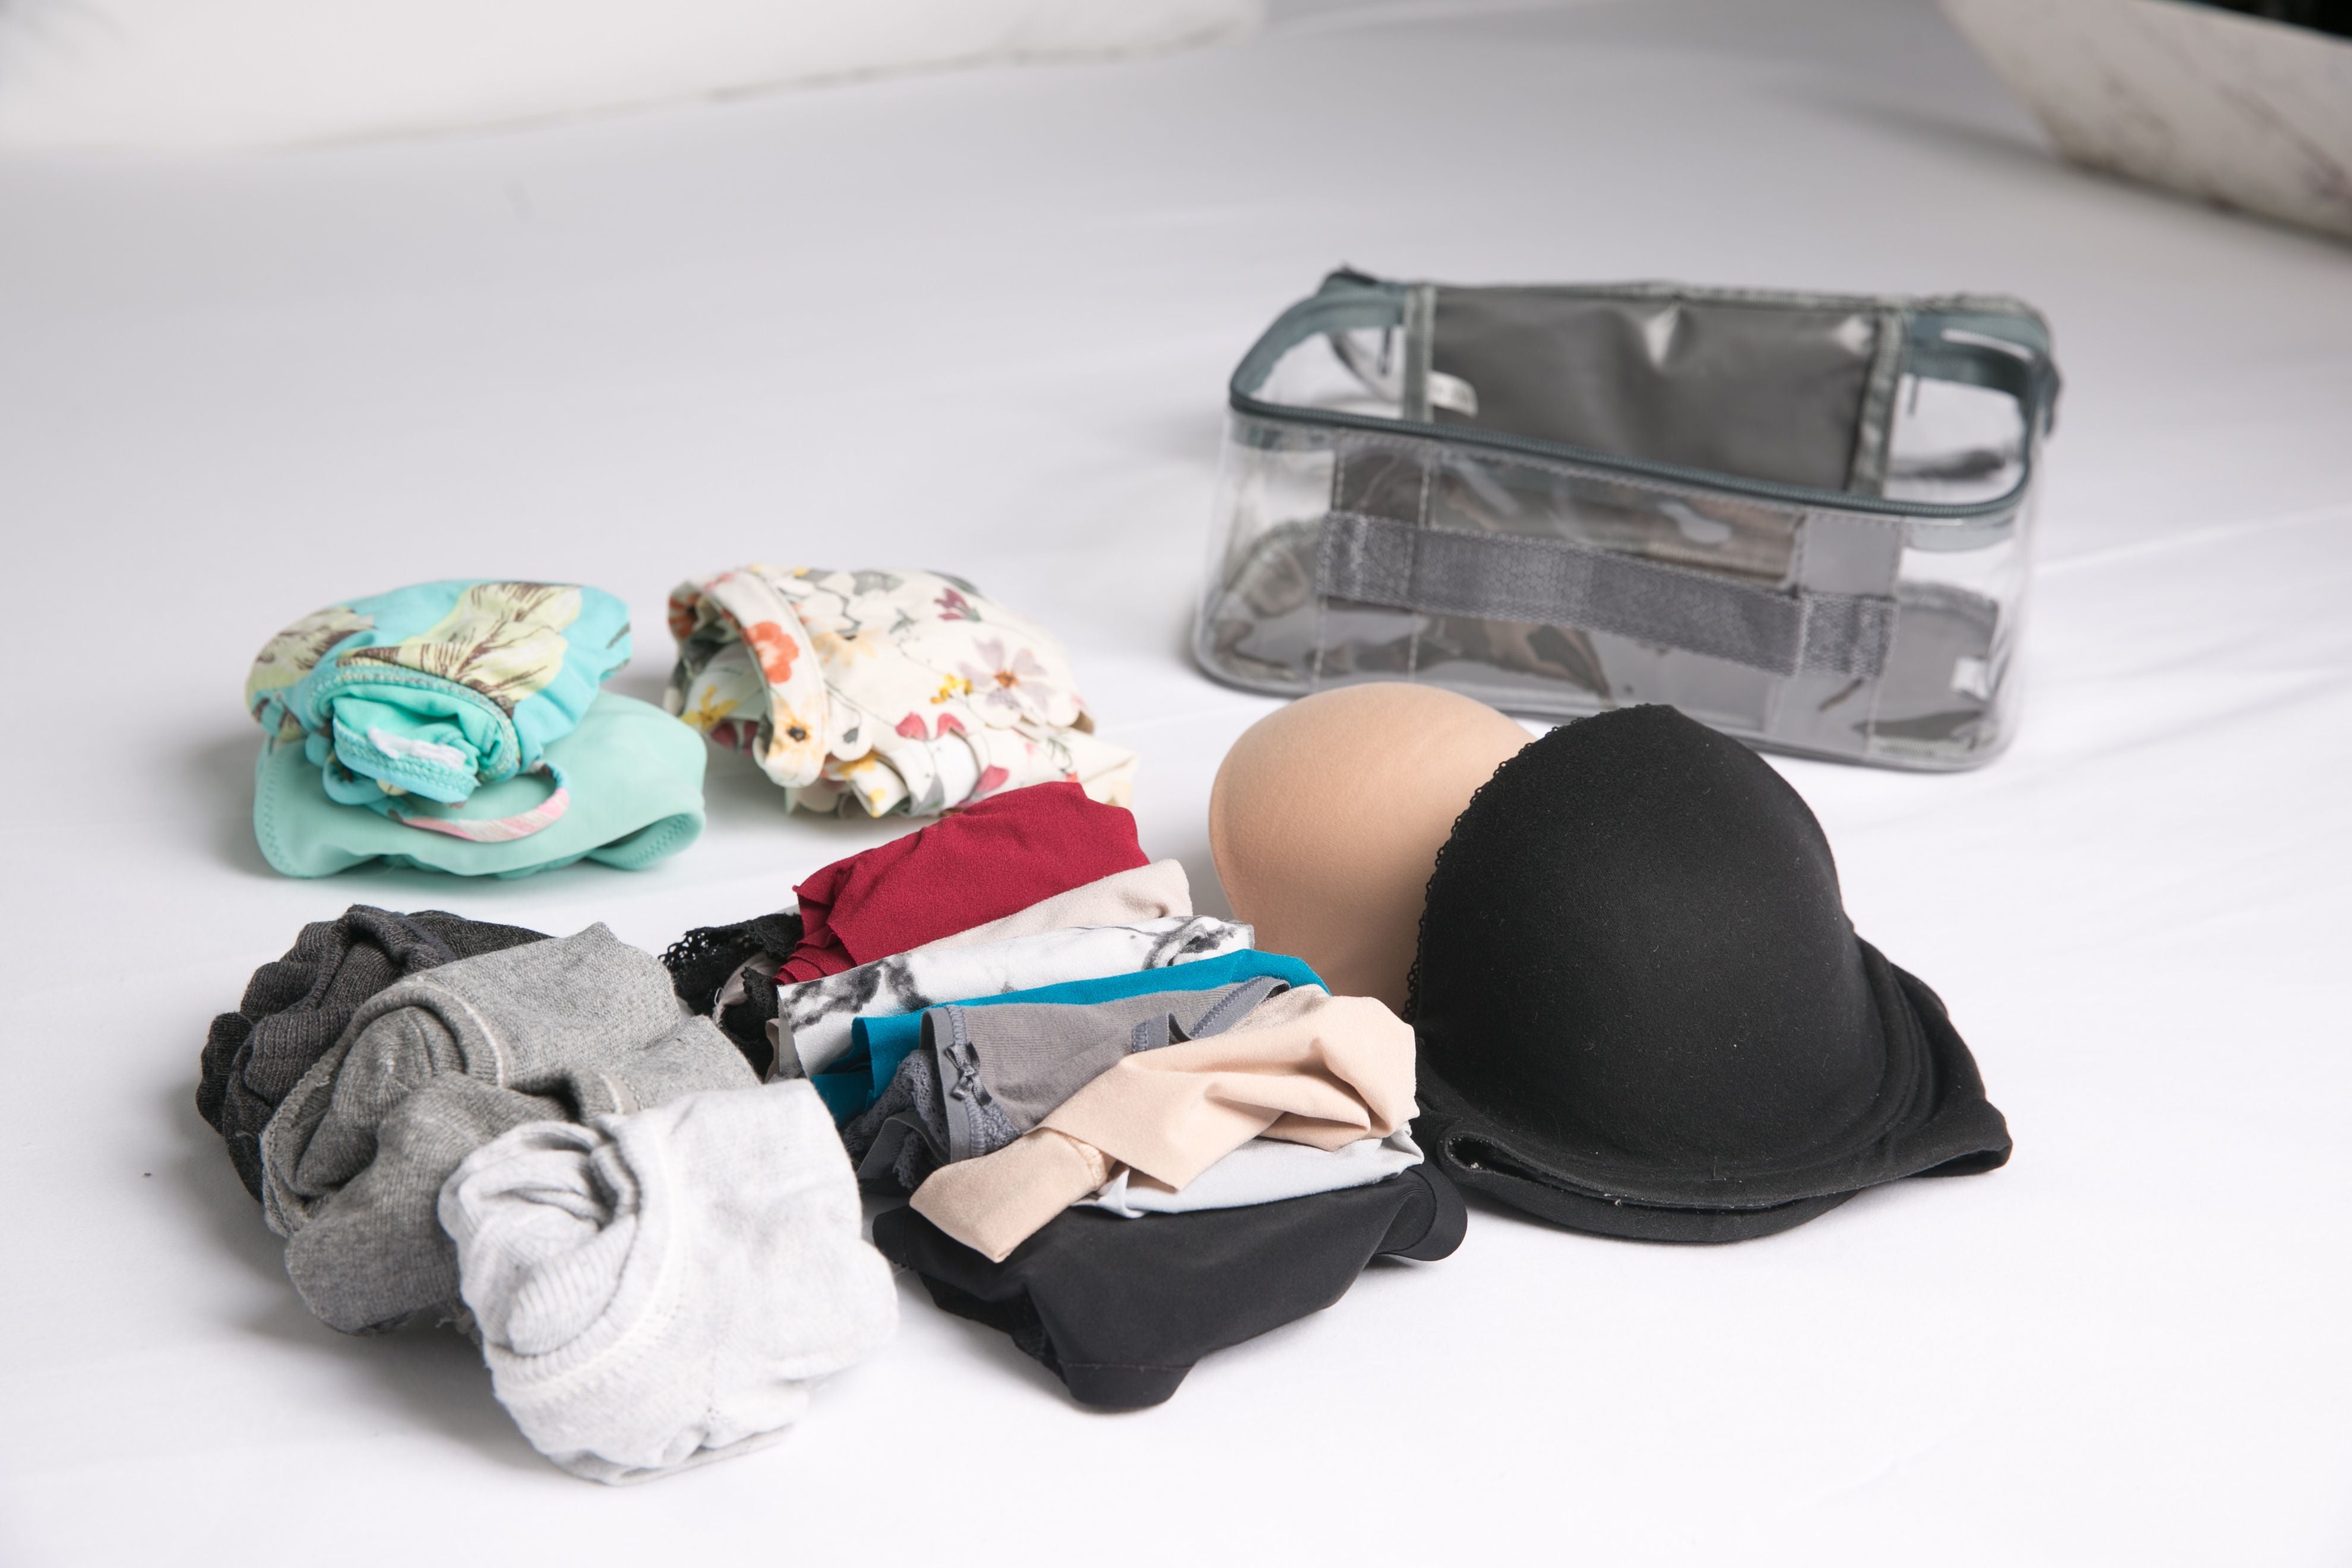 Undergarments rolled beside small packing cube